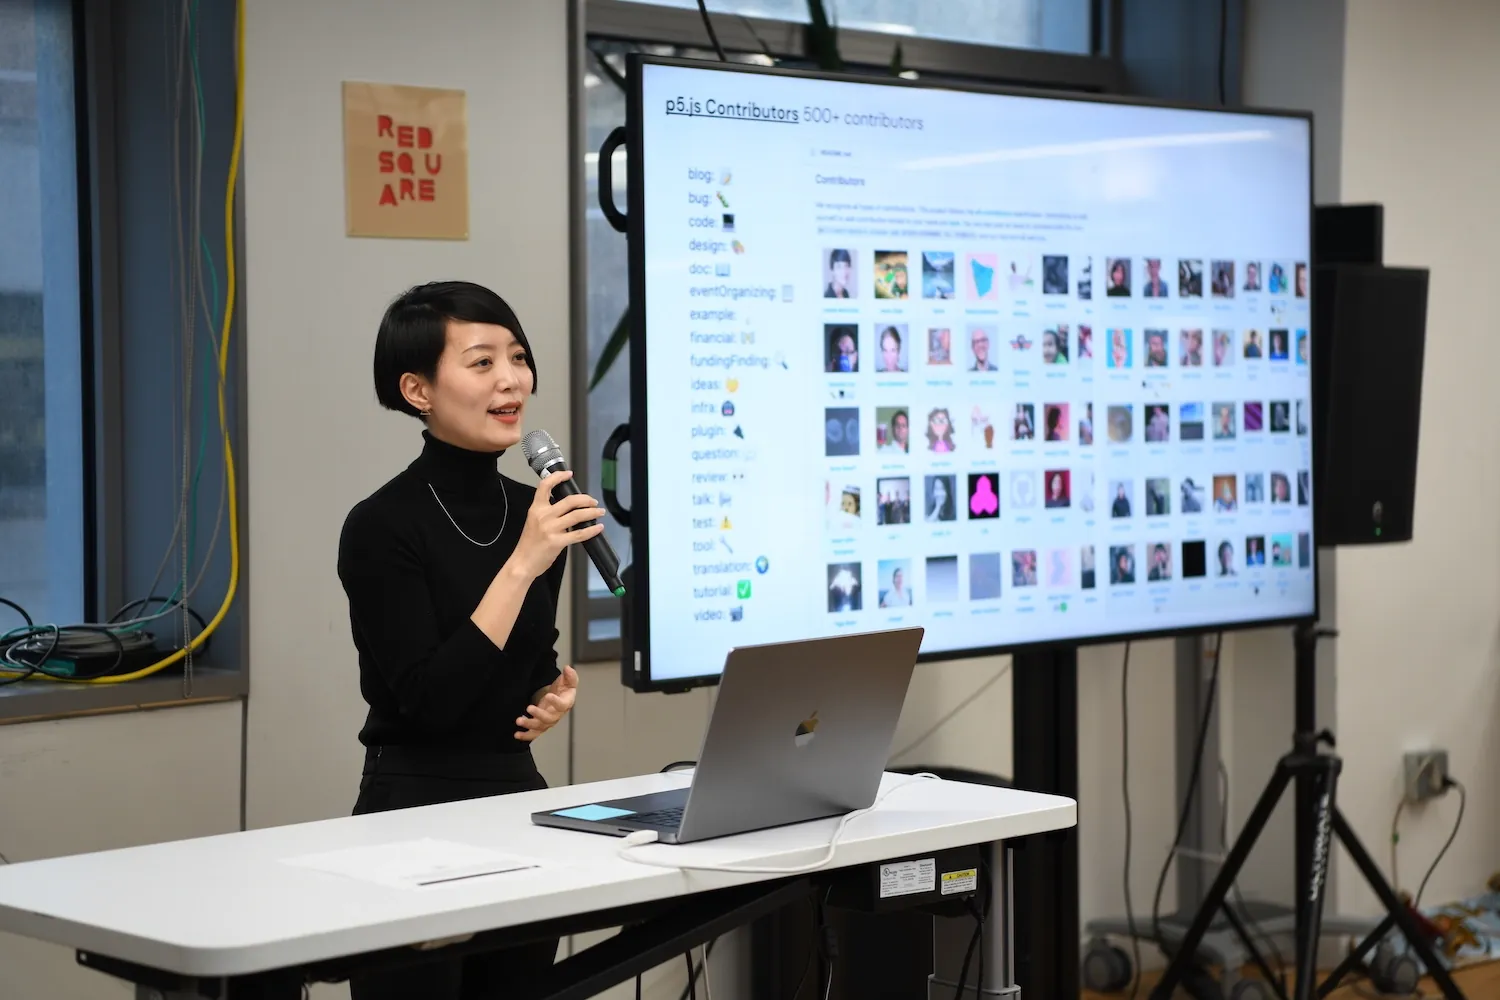 Qianqian Ye holding a mic next to a big t.v. screen that has a grid of p5.js contributor photos on it.